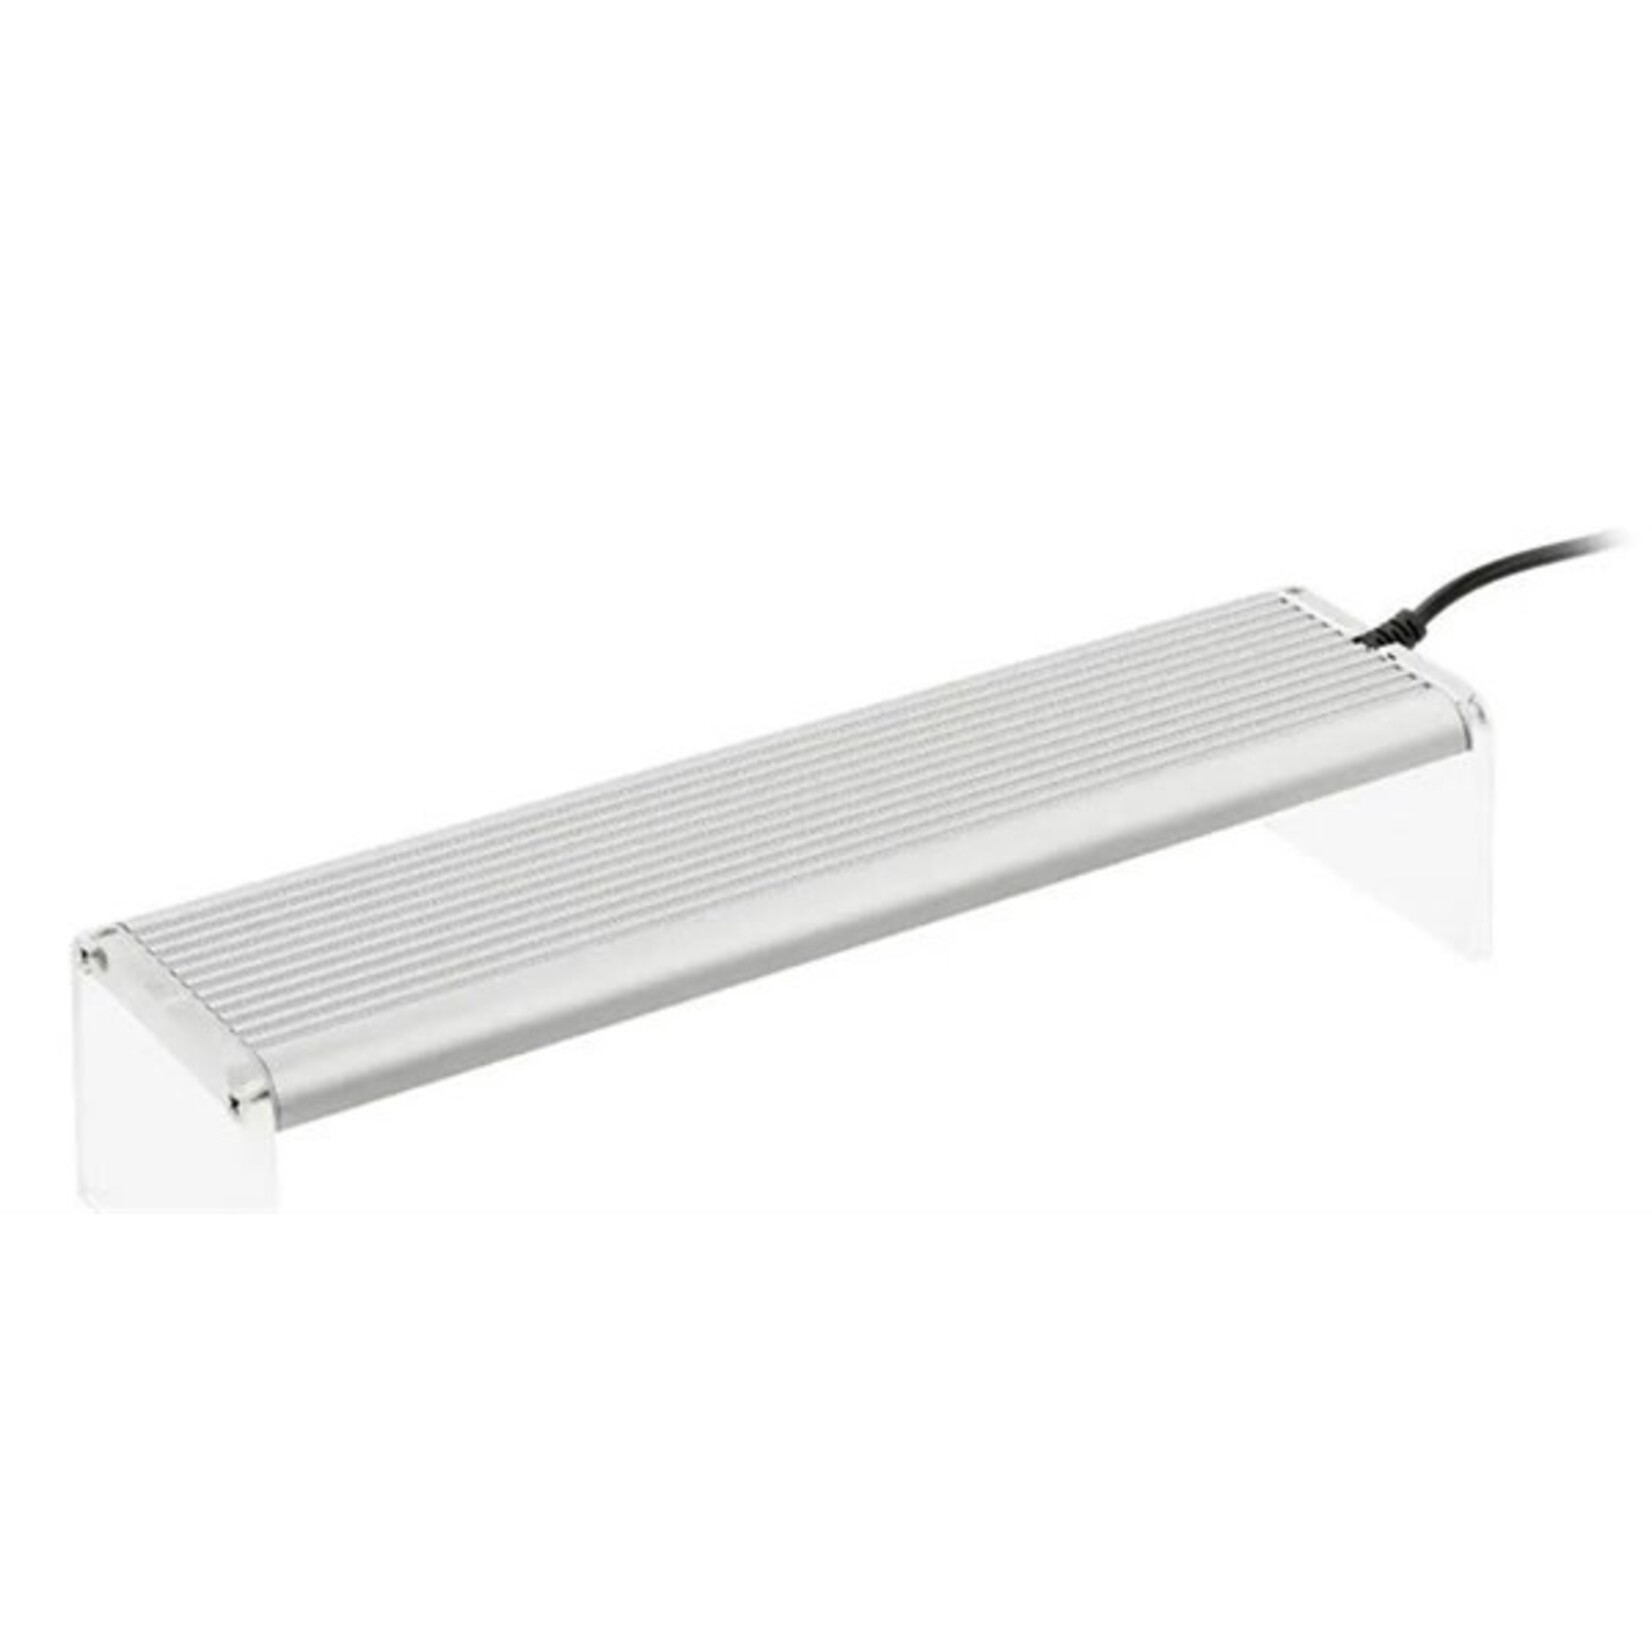 Chihiros A LED A451 45cm 27w - incl. Duitse trafo